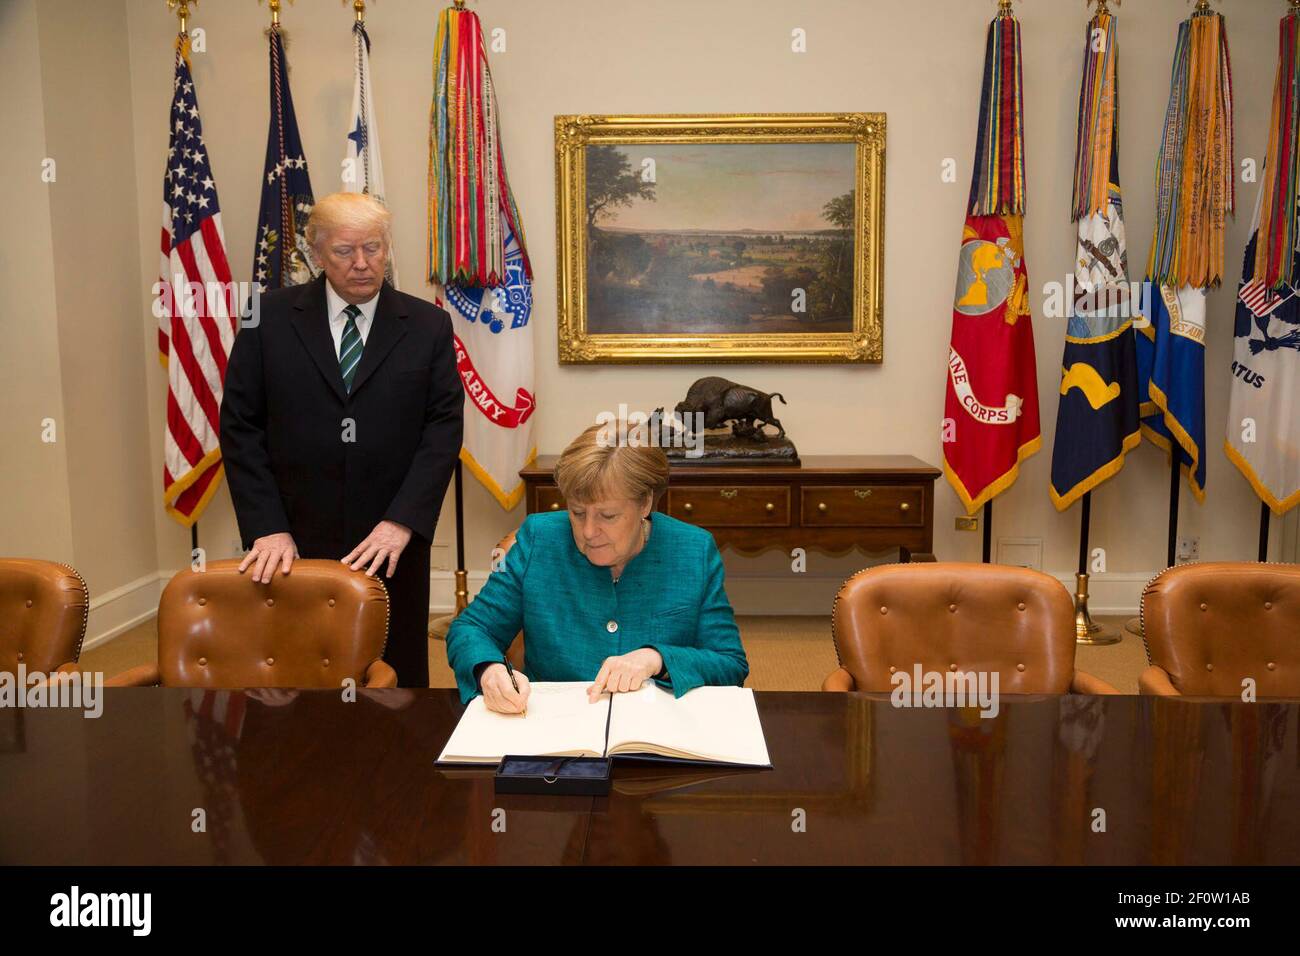 President Donald Trump accompanies German Chancellor Angela Merkel as she signs the guest book Friday March 17 2017 in the Roosevelt Room during her official visit to the White House in Washington D.C. Stock Photo